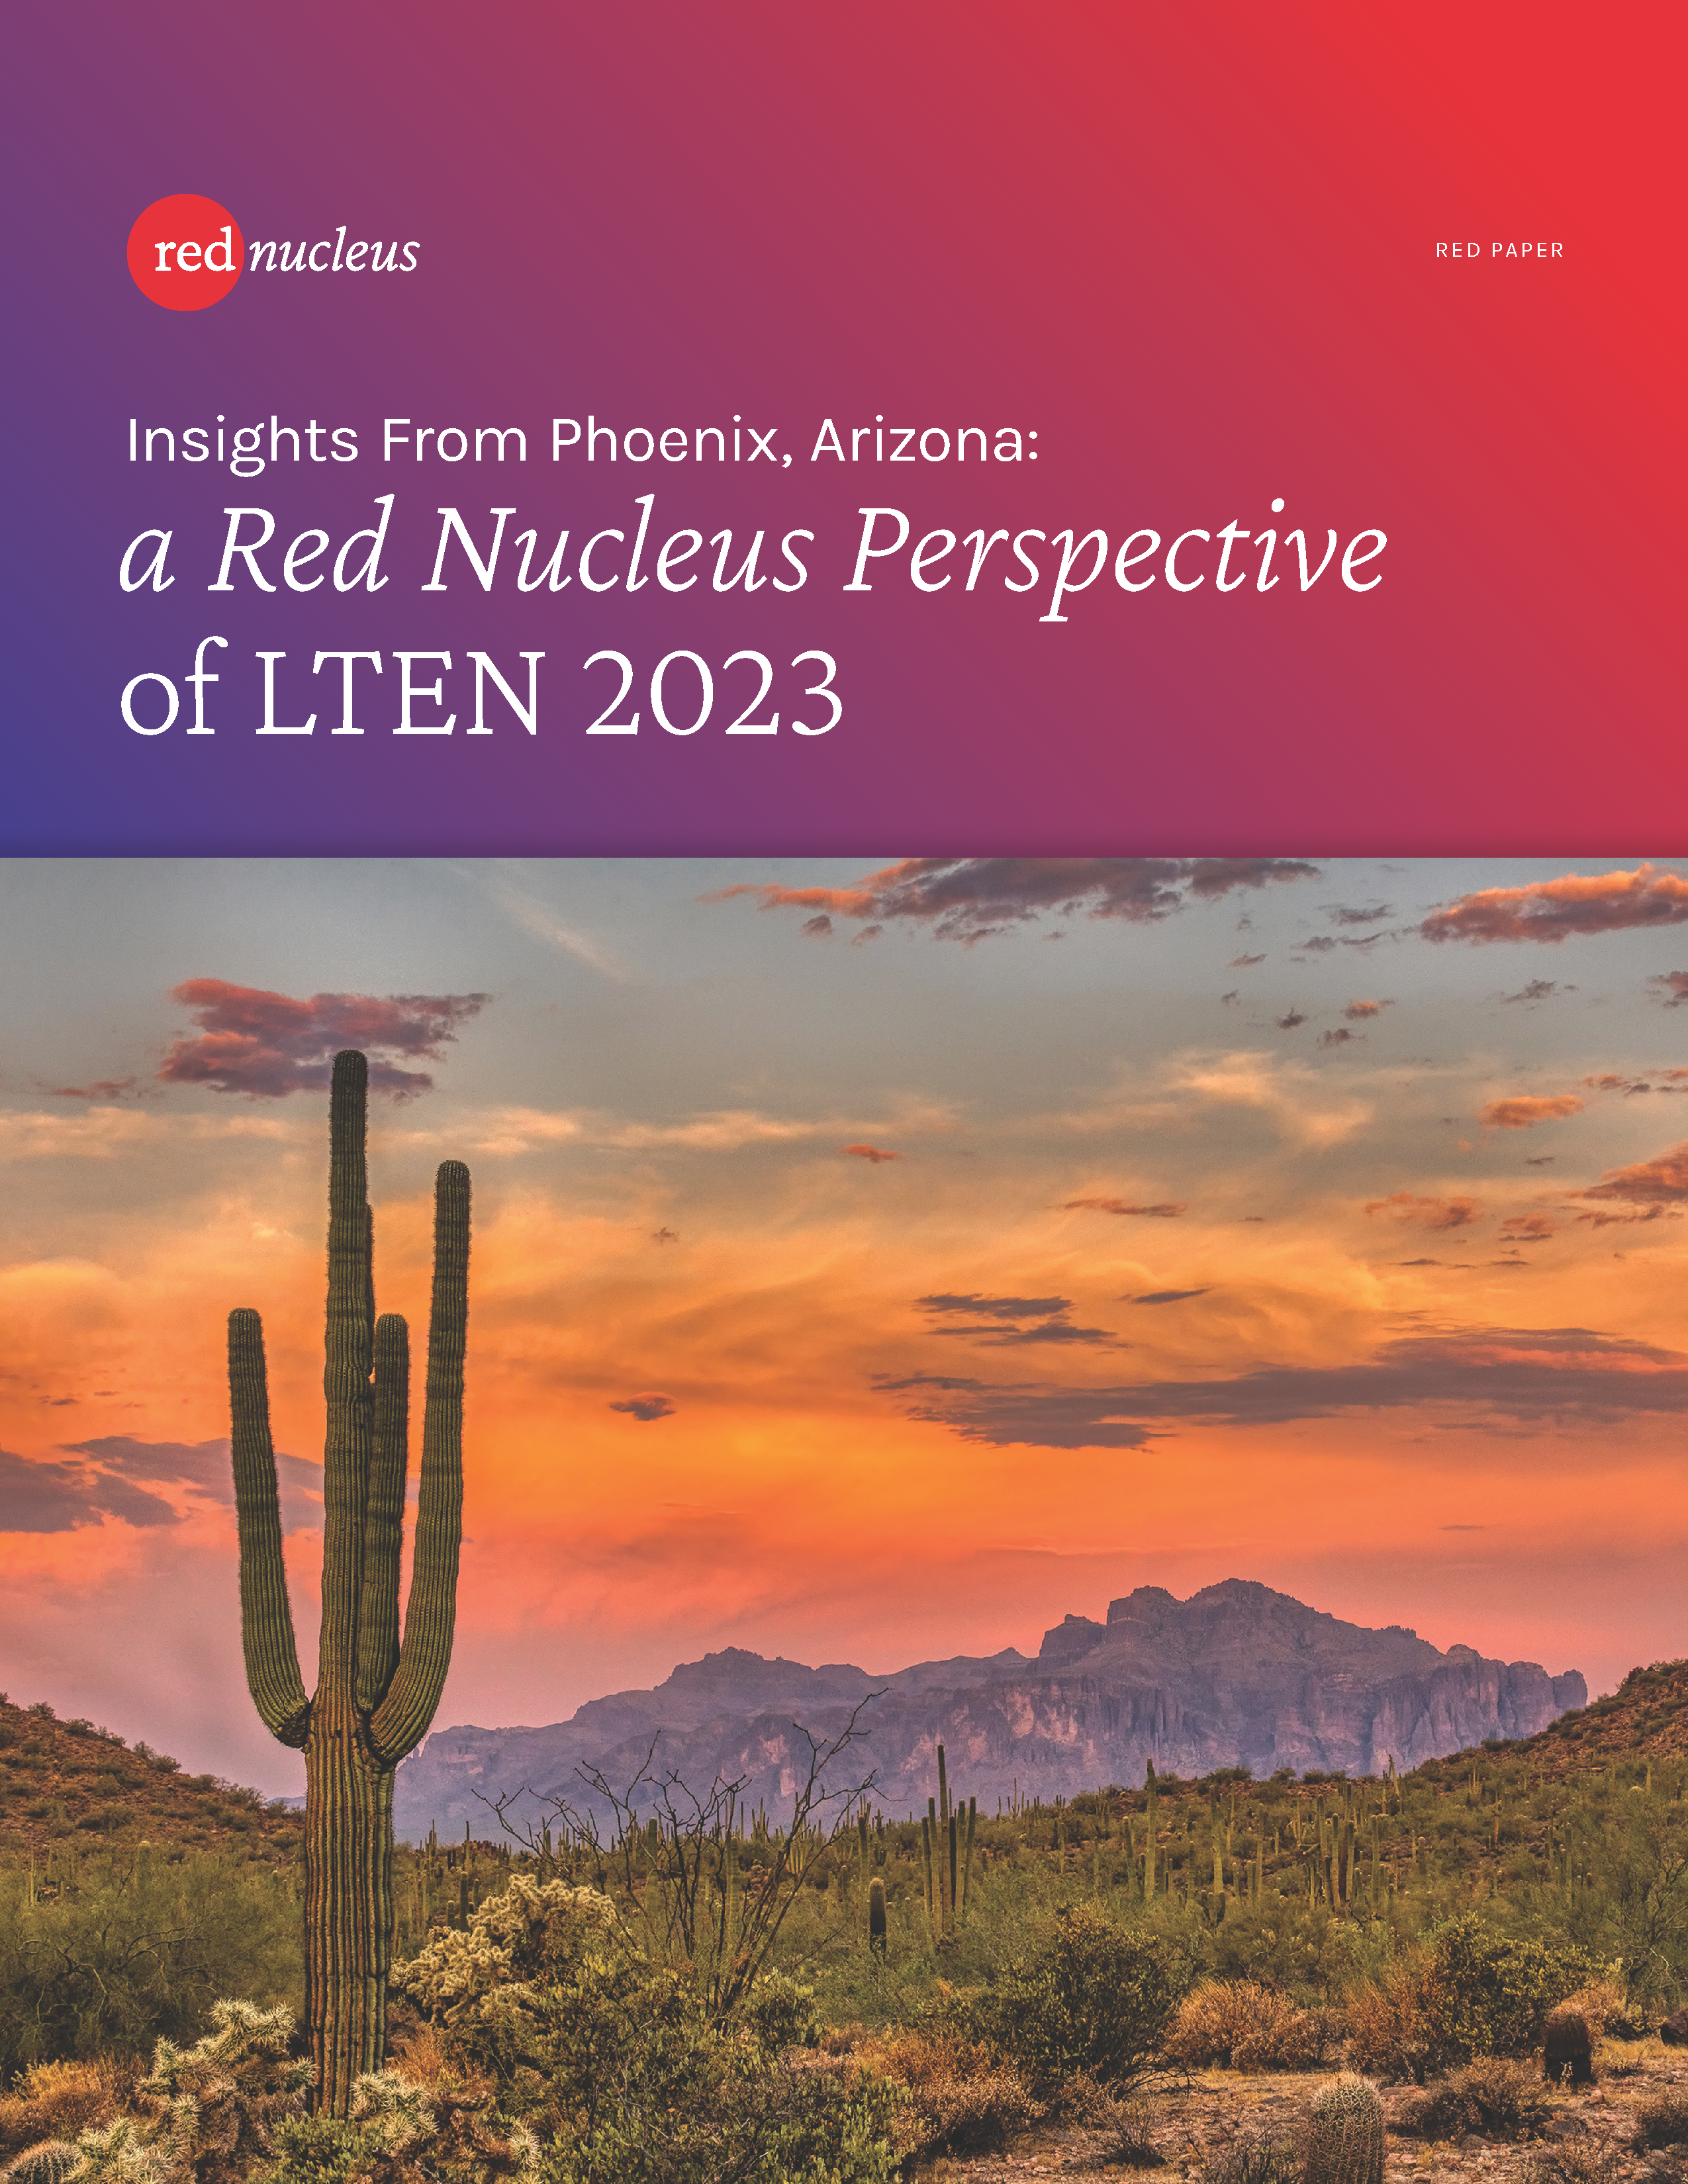 First page of a Red Nucleus Perspective of LTEN 2023